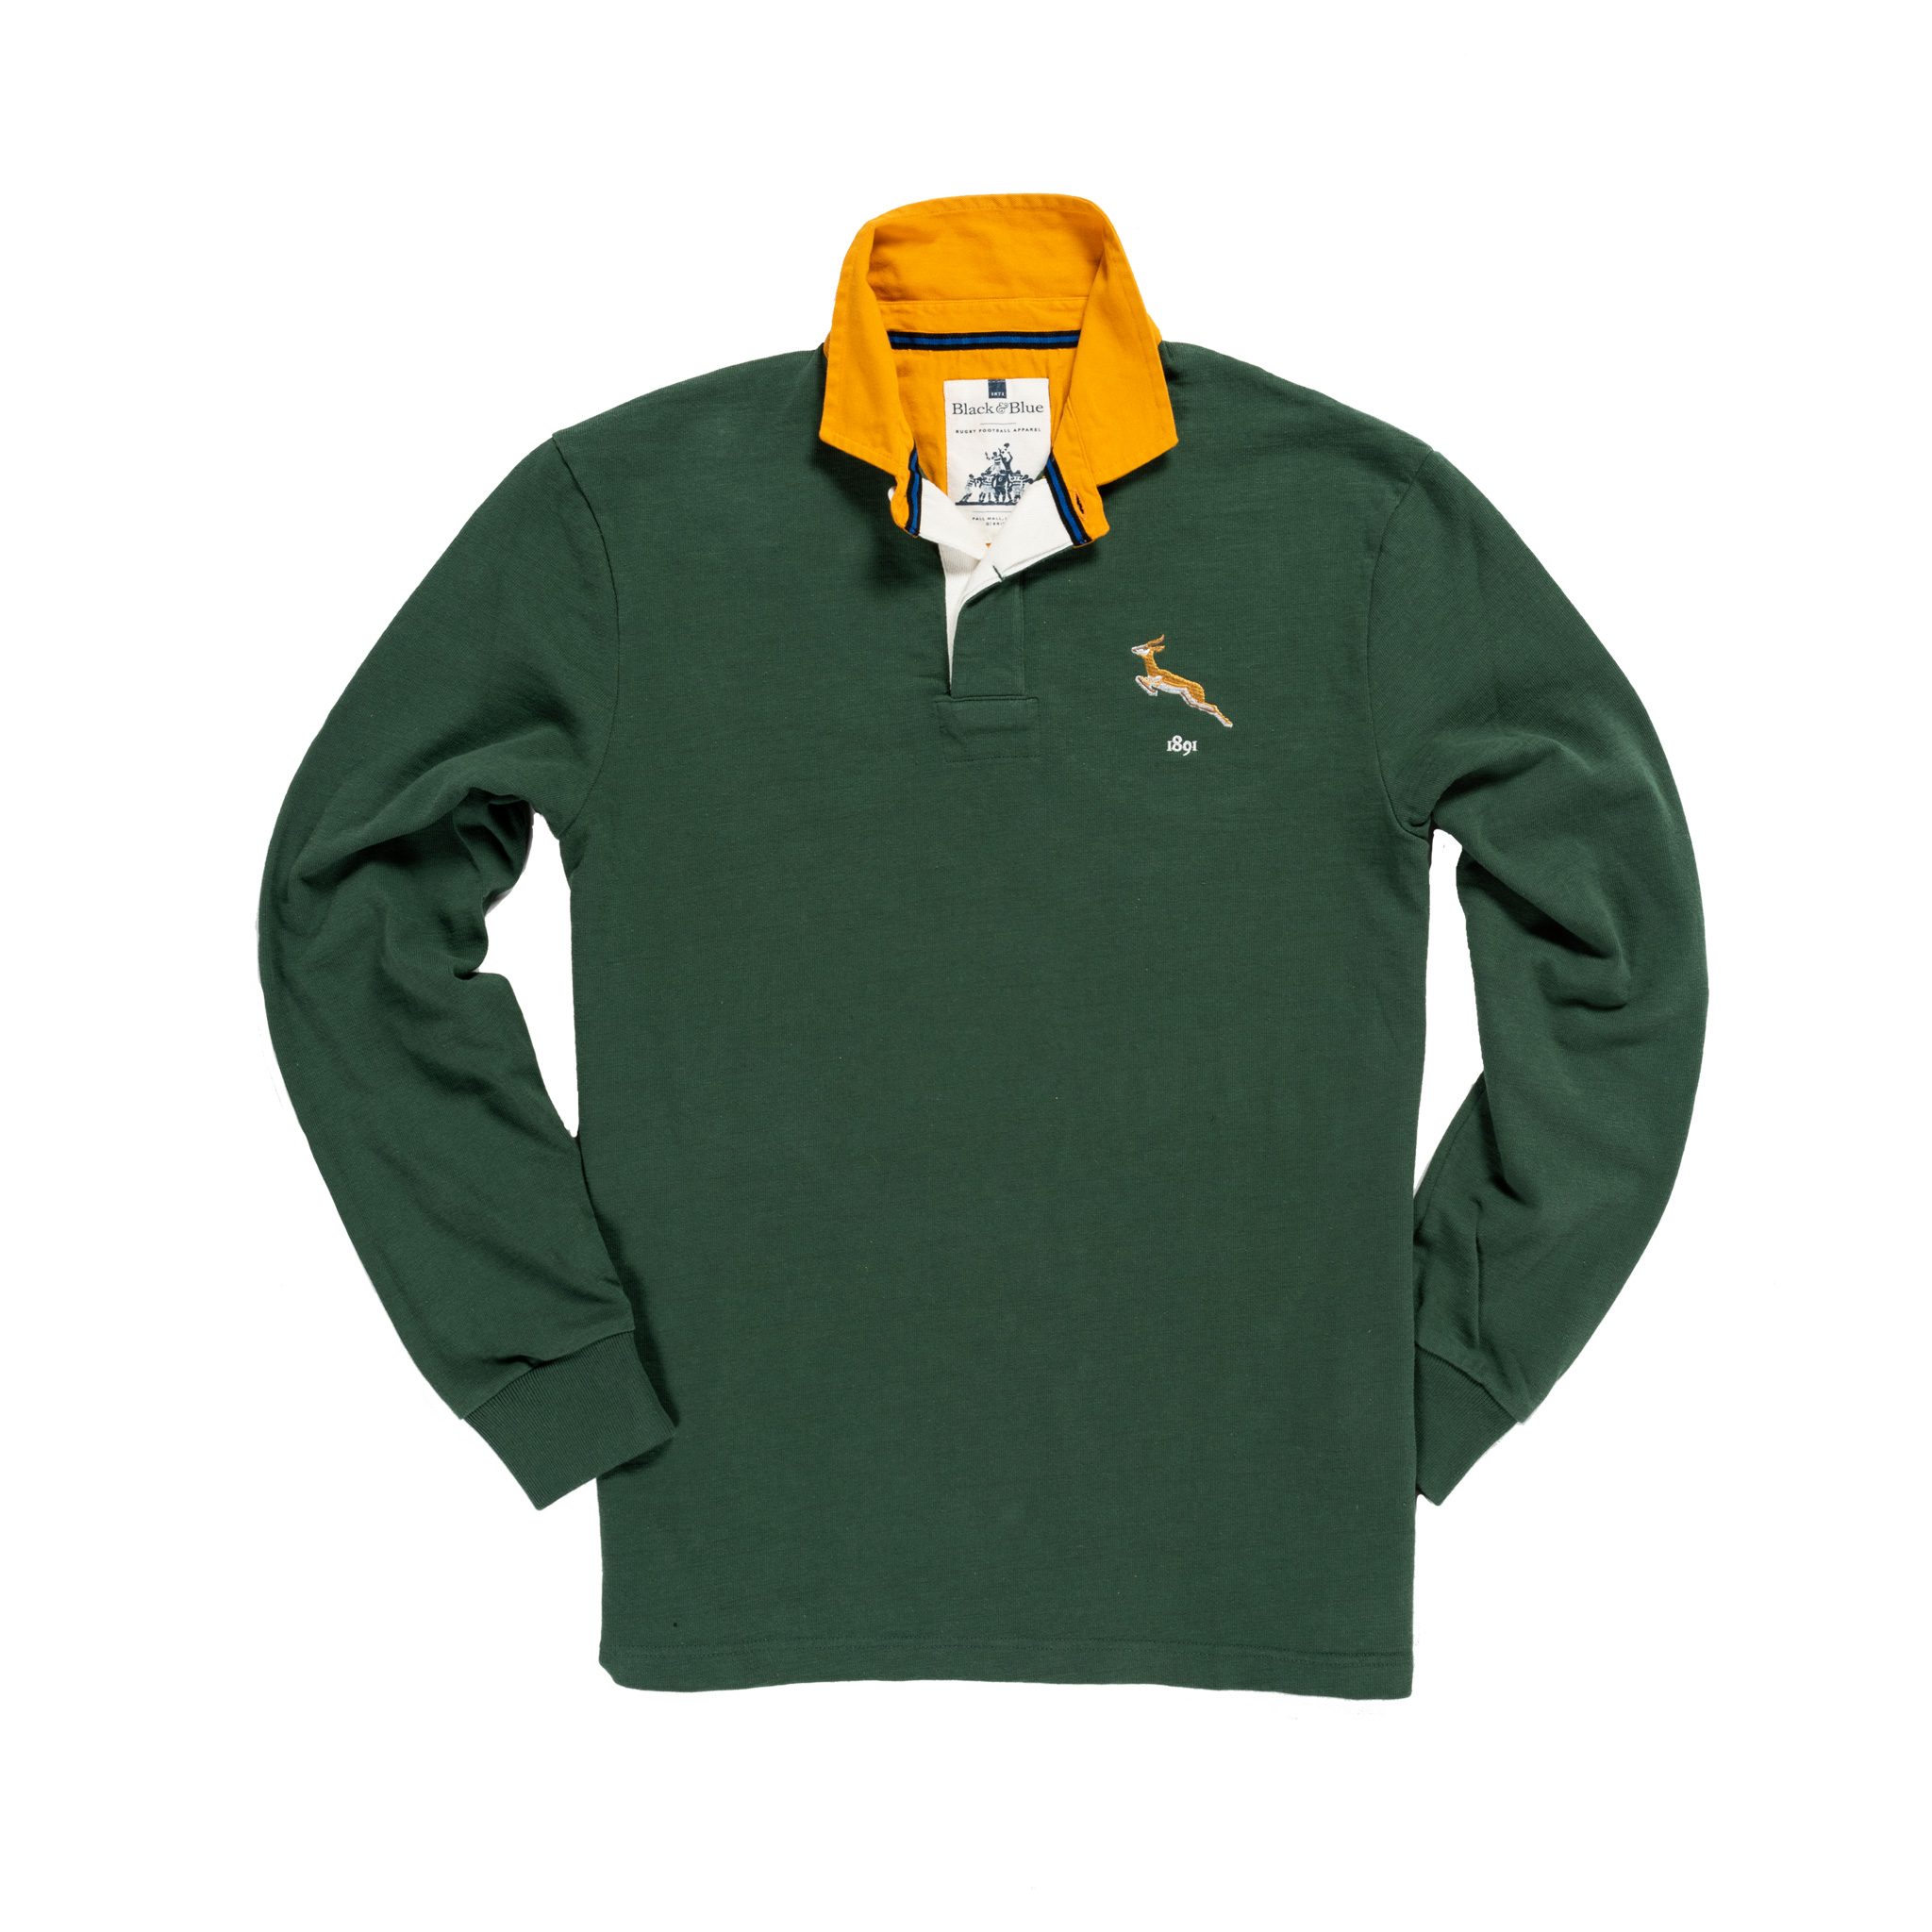 SOUTH AFRICAN RETRO CLASSIC COMBED COTTON  SPRINGBOK RUGBY SHIRT 